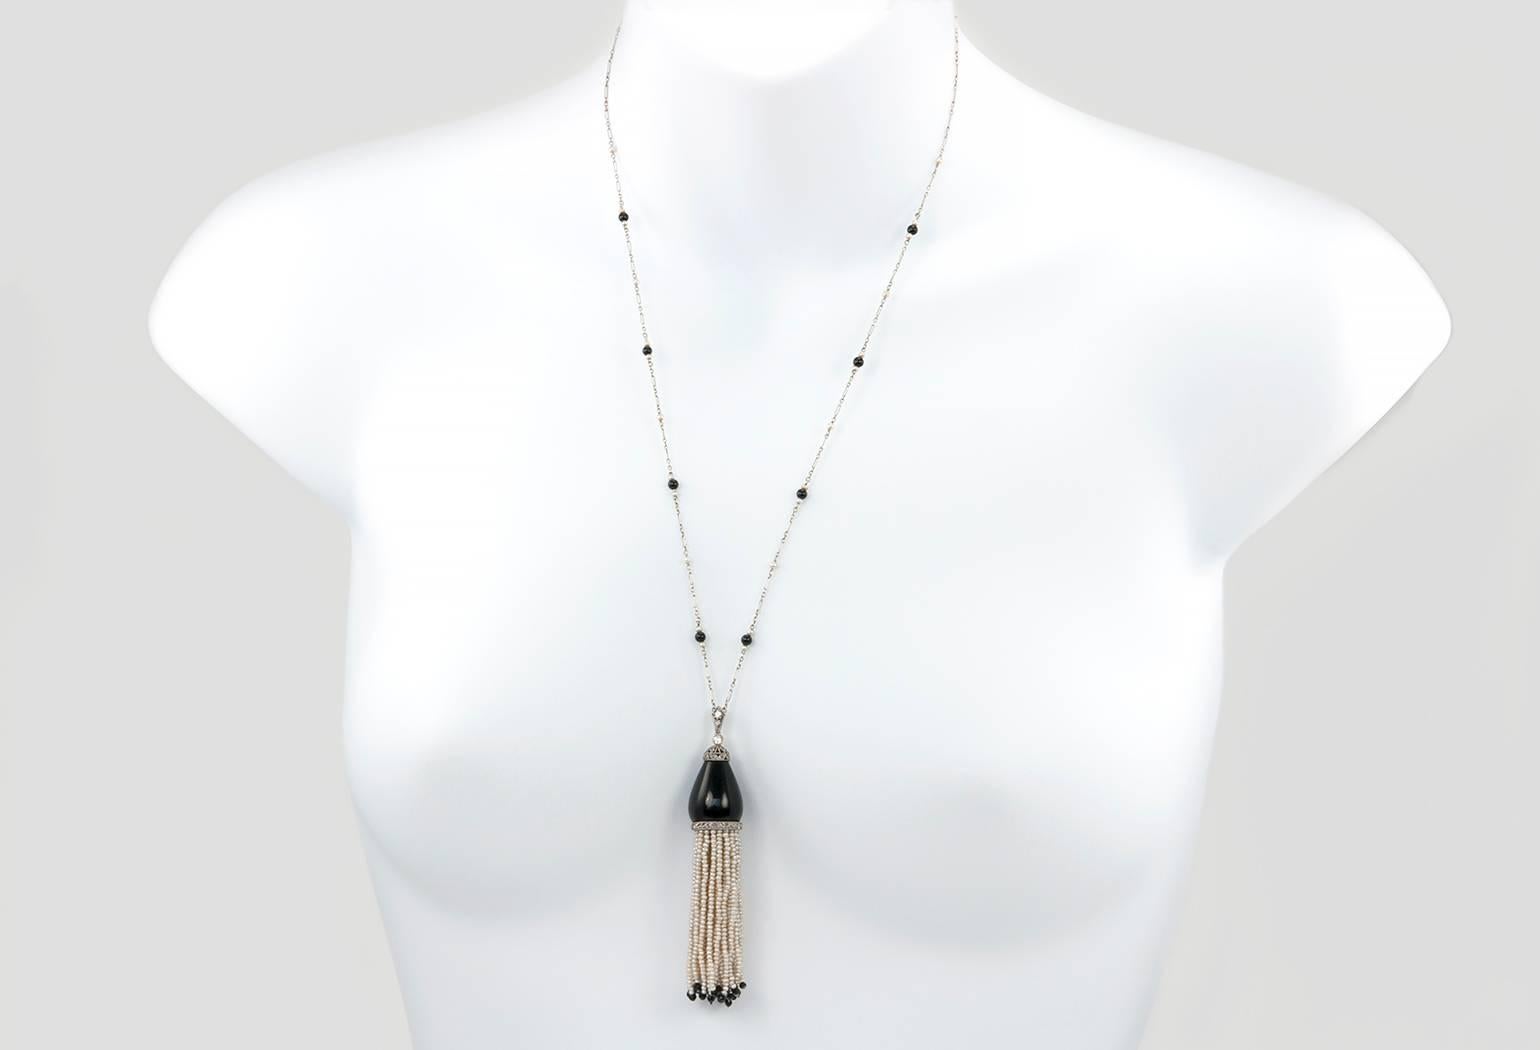 A gorgeous Ghiso platinum sautoir! This necklace features a platinum link 24 inch chain accented with pearls and onyx cabochons.  The tassel is approximately 3 inches in length and is accented with diamonds, onyx, and pearl strands that have great